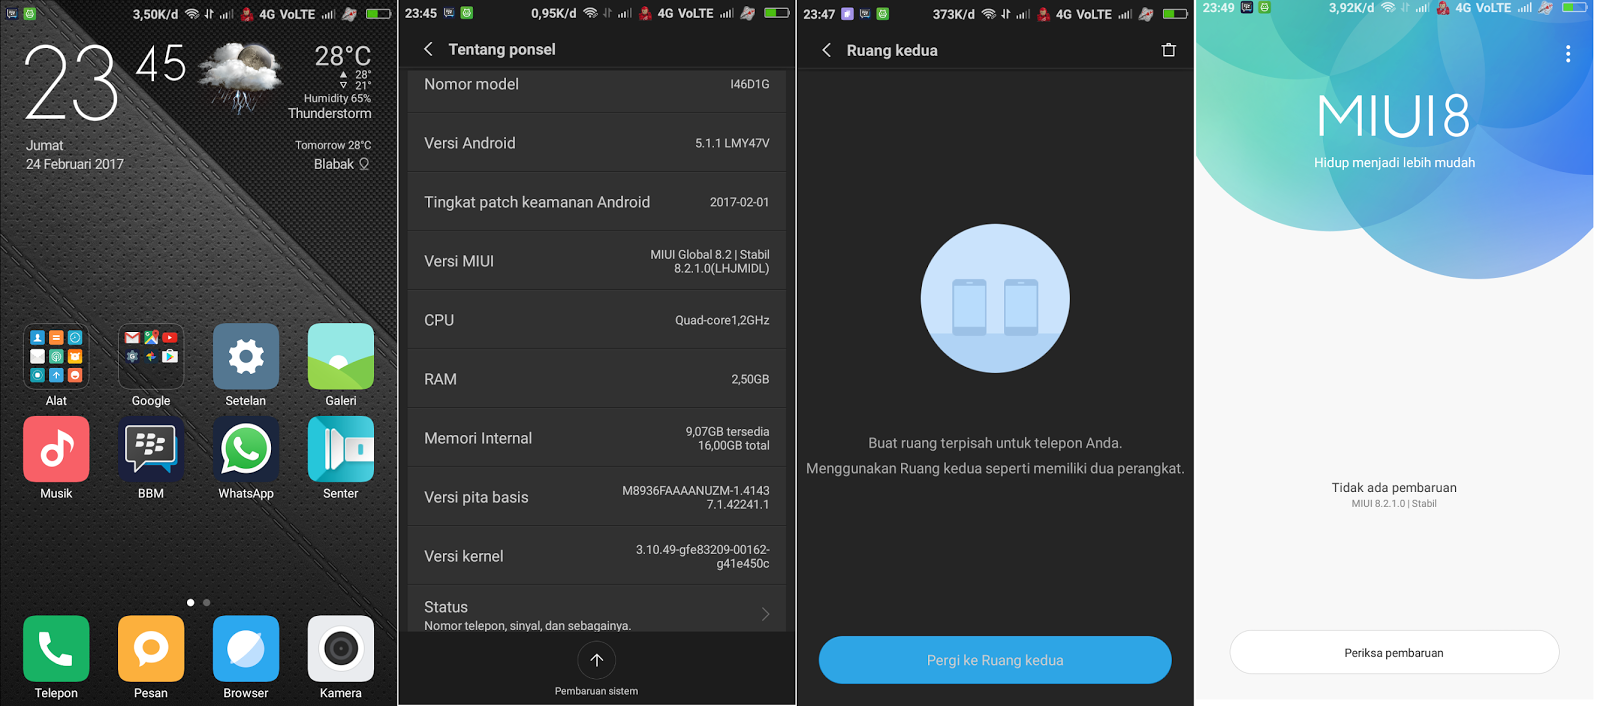 CUSTOM ROM MIUI 8 Global Stable v8.2.1.0 VoLTE Andromax R dan Andromax R Spesial Edition